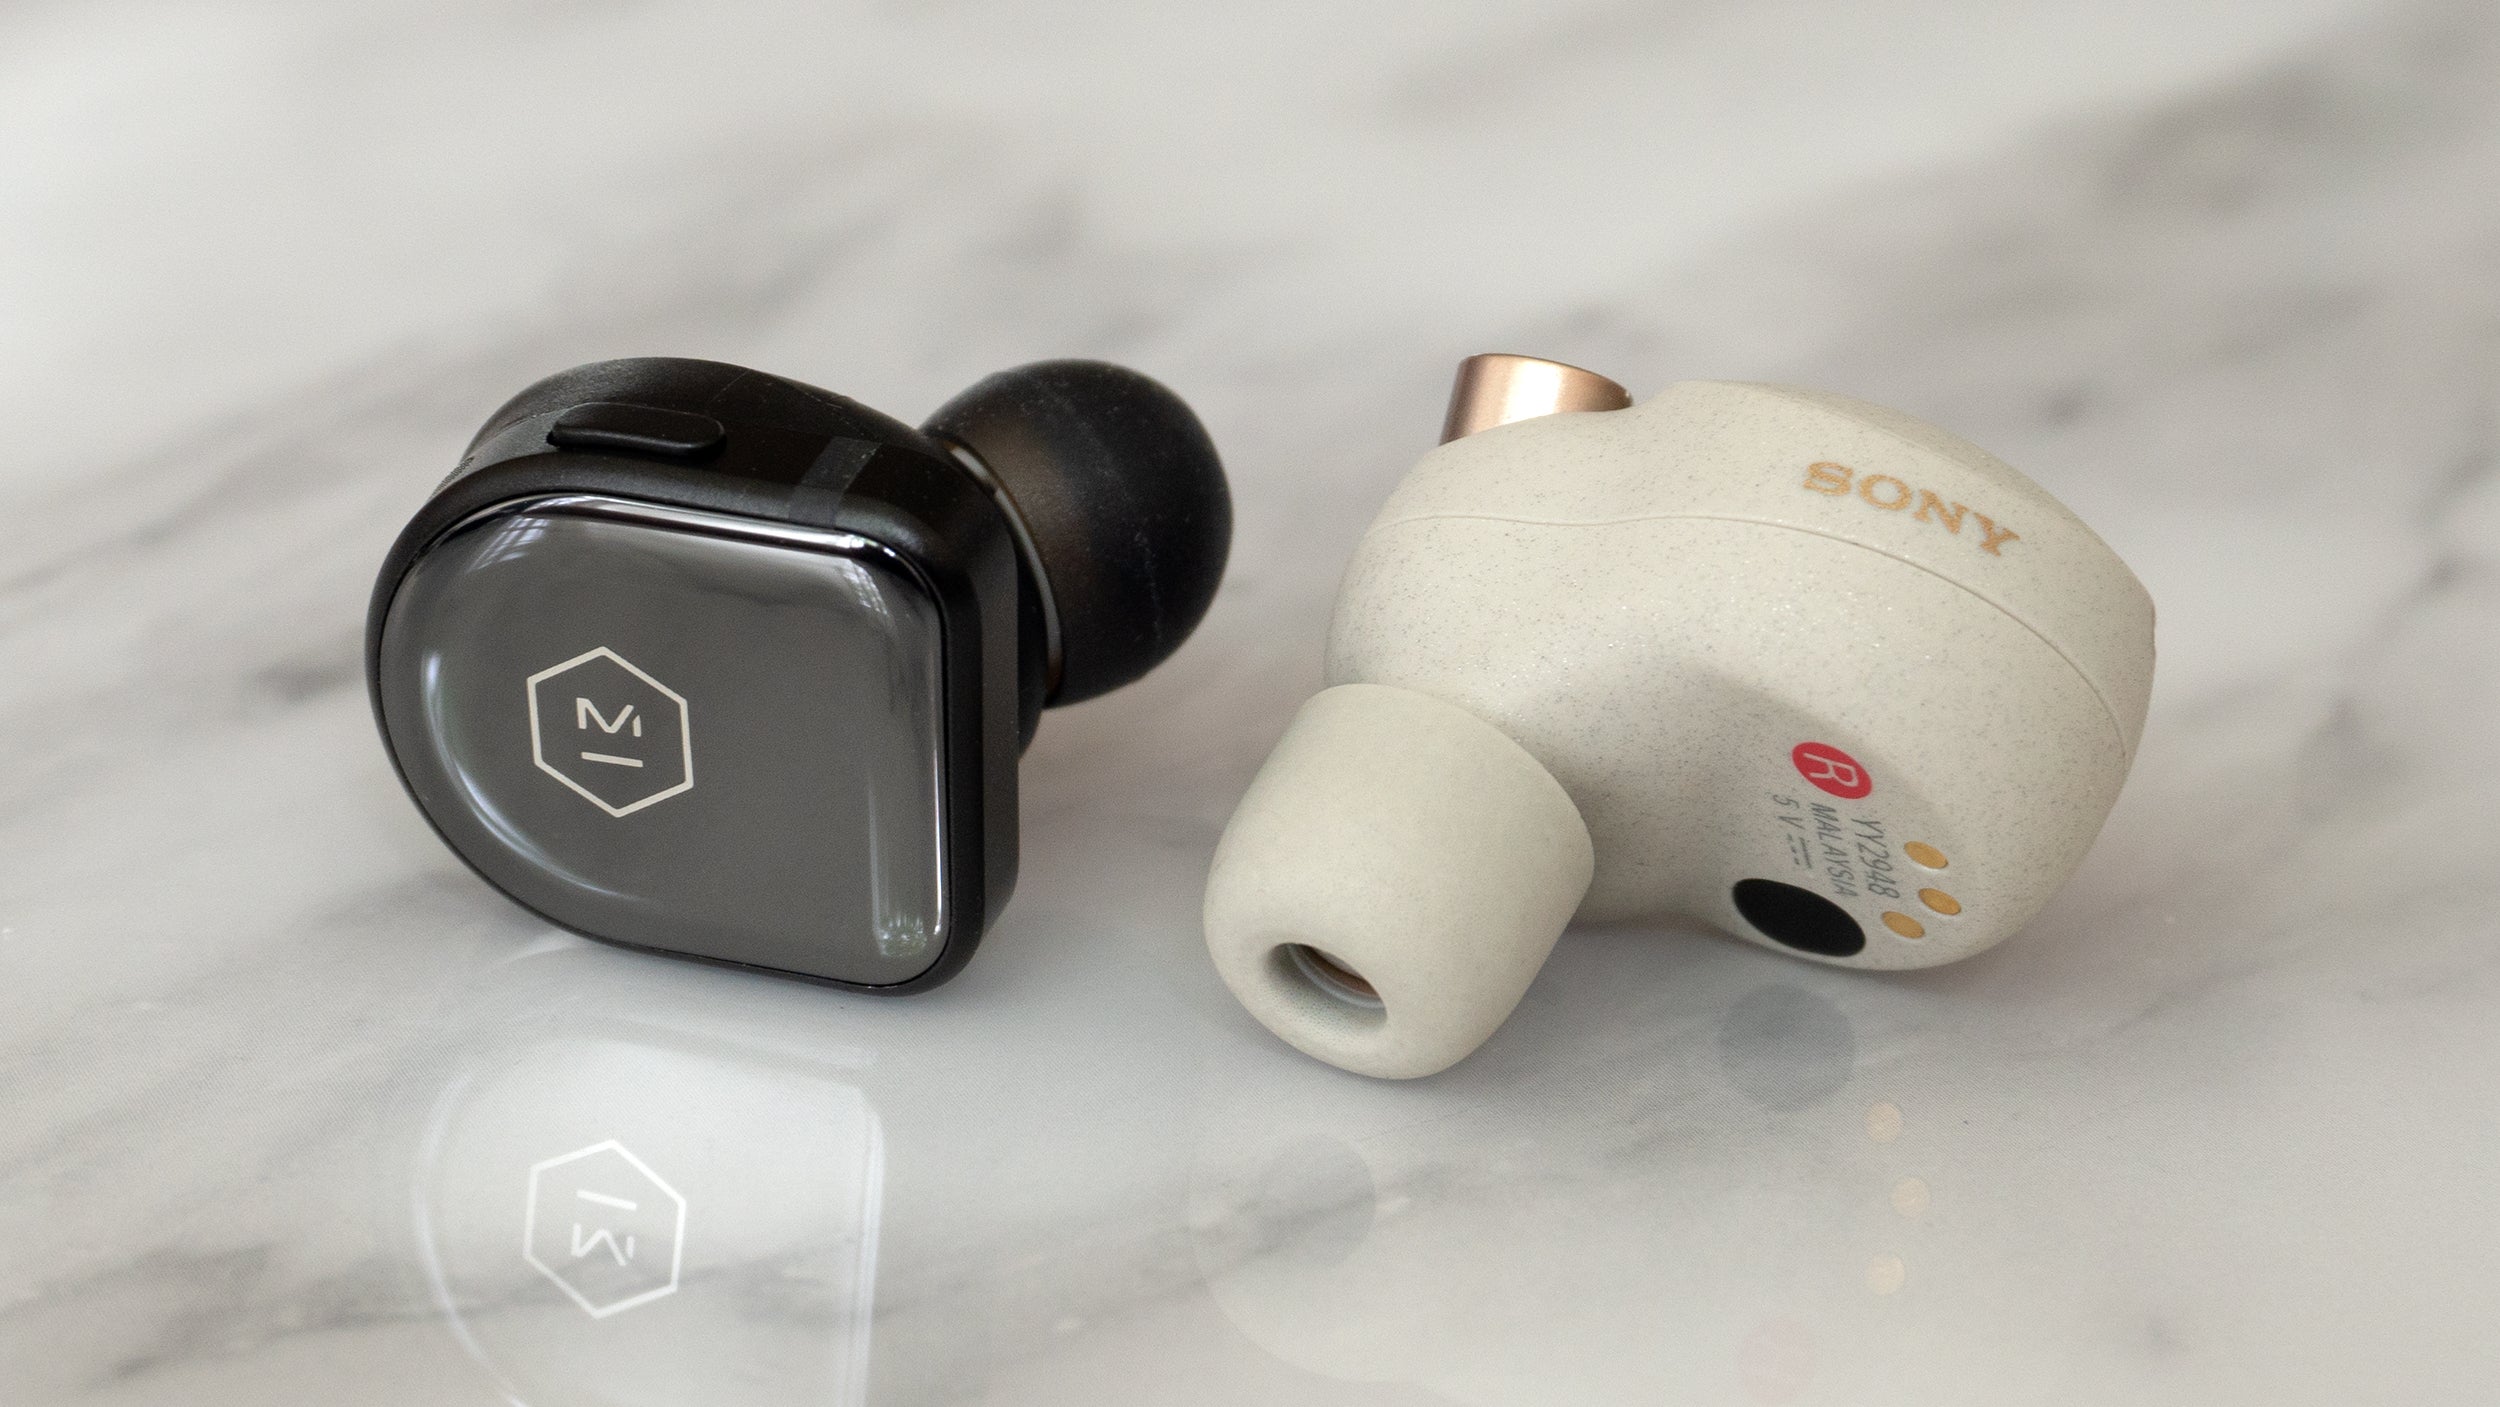 Despite being smaller, the Master & Dynamic MW08 wireless earbuds (left) include 11mm drivers, compared to the 6mm drivers in the larger Sony WF-1000XM3 earbuds (right). (Photo: Andrew Liszewski/Gizmodo)